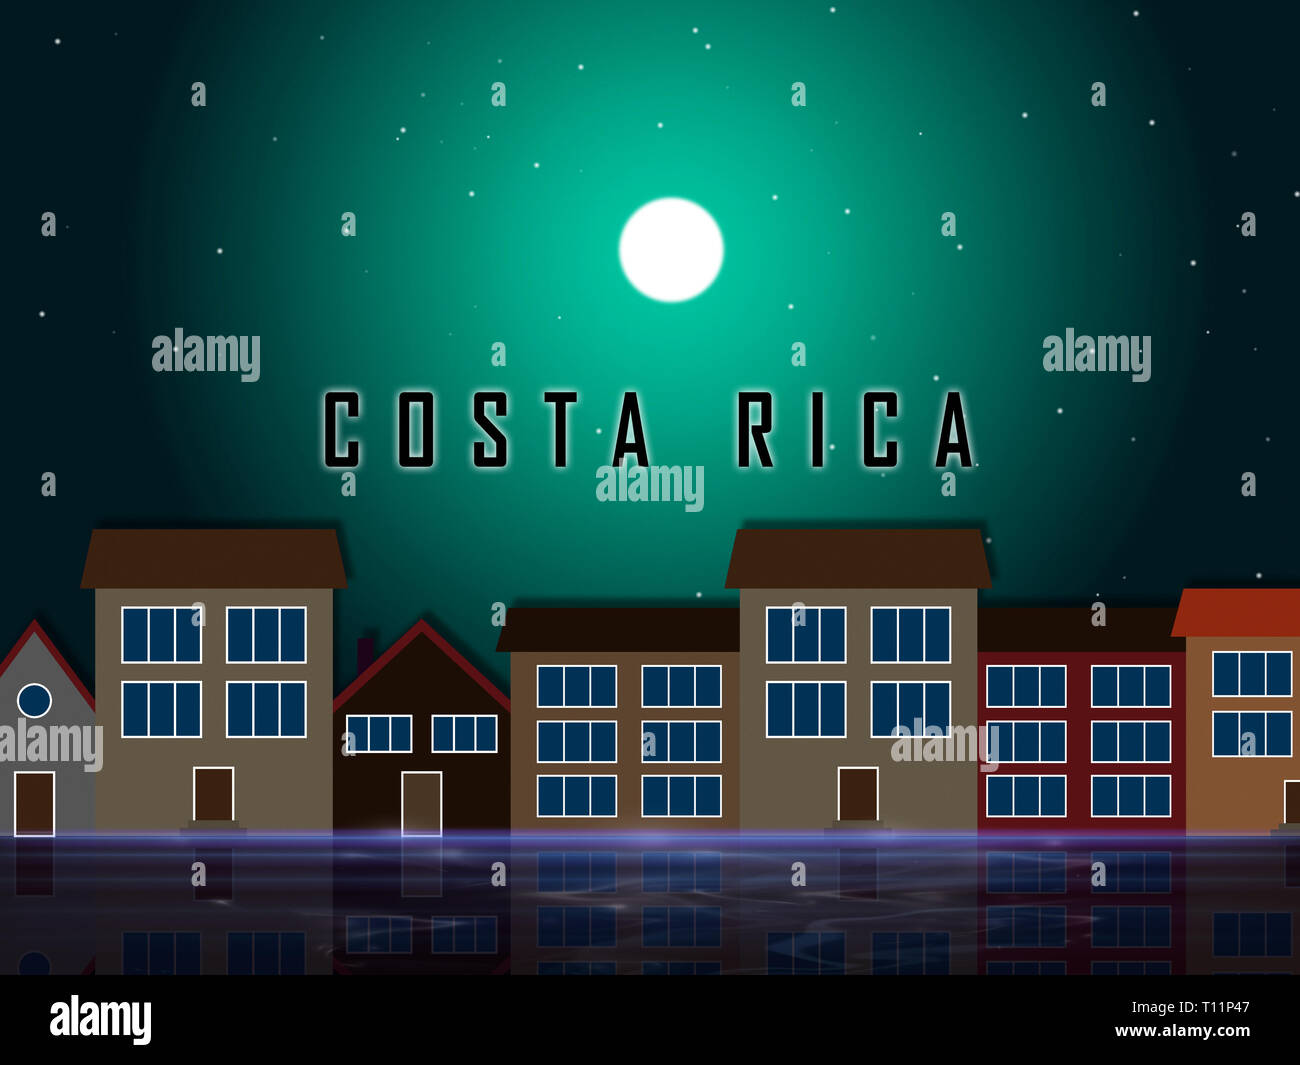 Costa Rica Homes Street Depicts Real Estate Or Investment Property. Luxury Residential Buying And Ownership - 3d Illustration Stock Photo